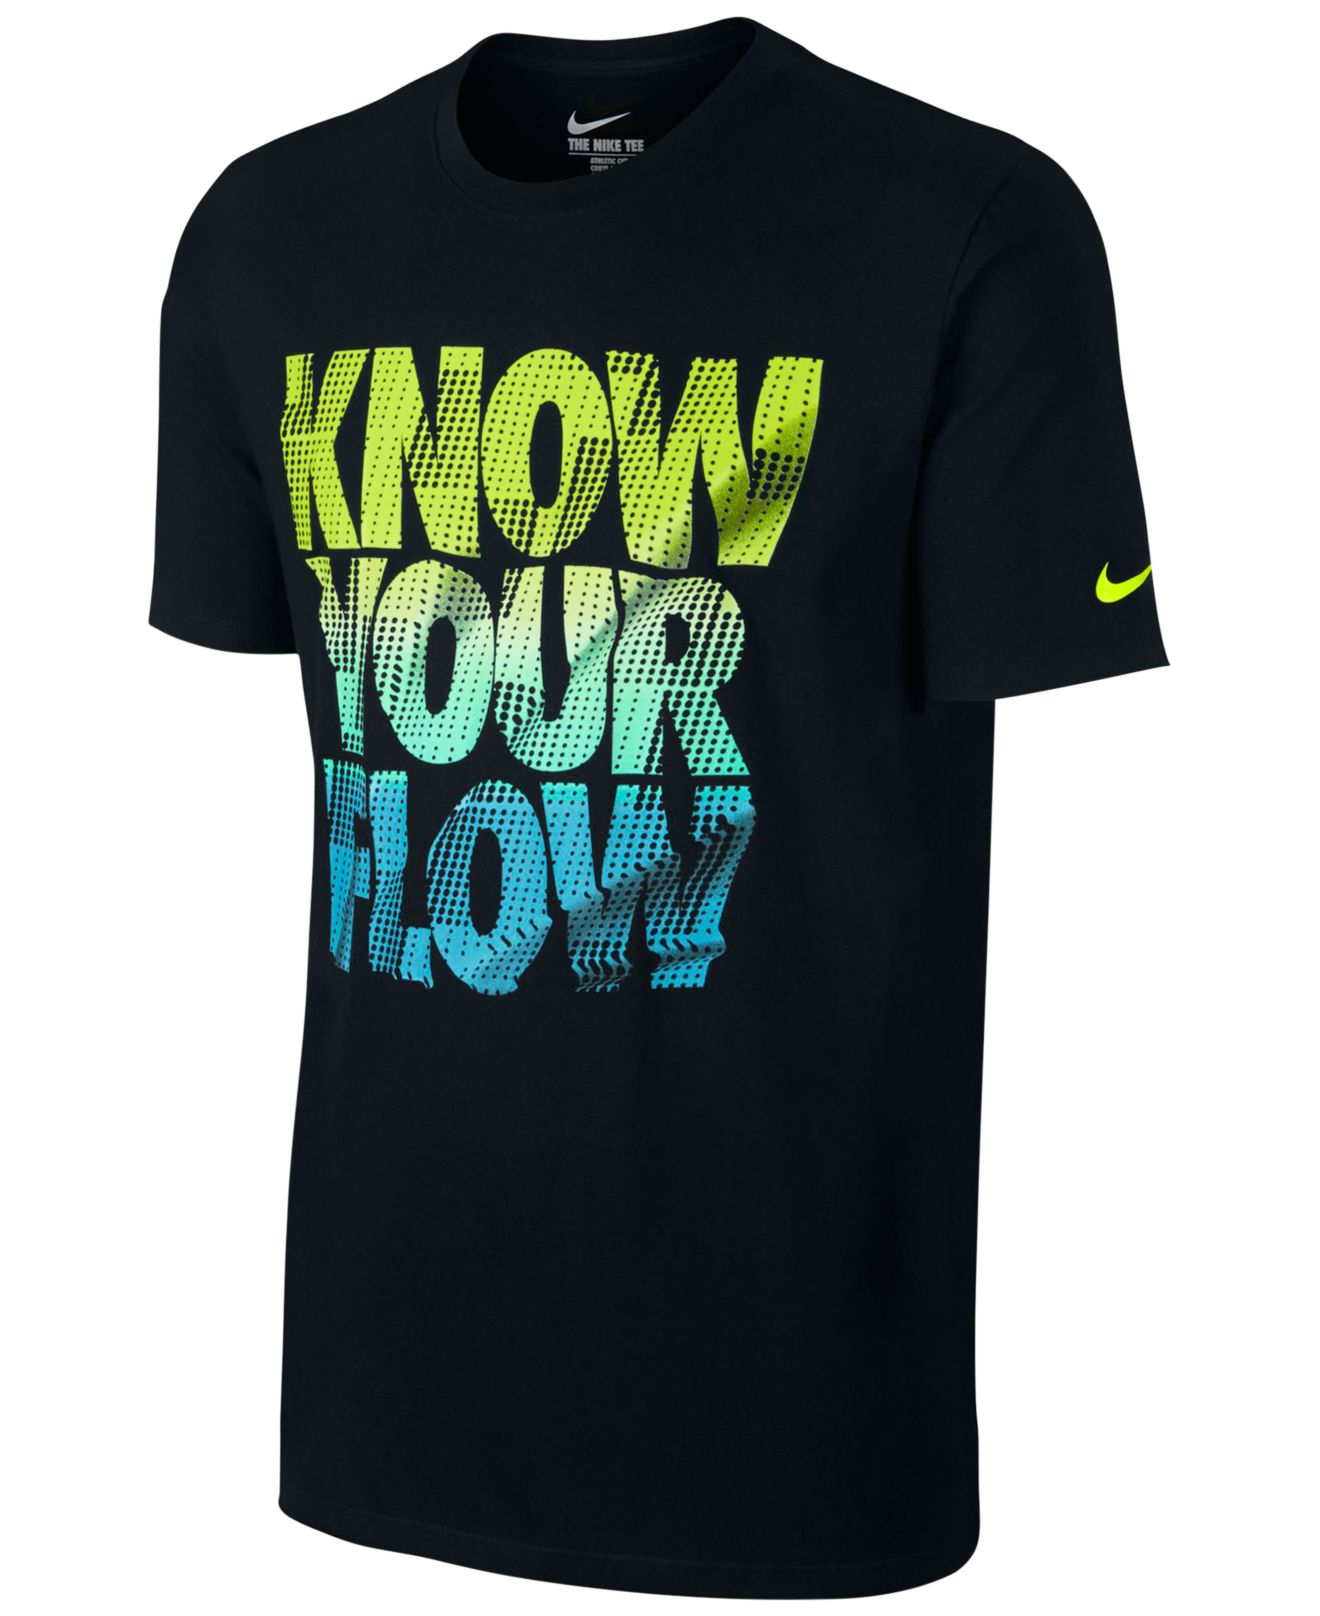 Nike Cotton Men s Know Your Flow Graphic T shirt  in Black 